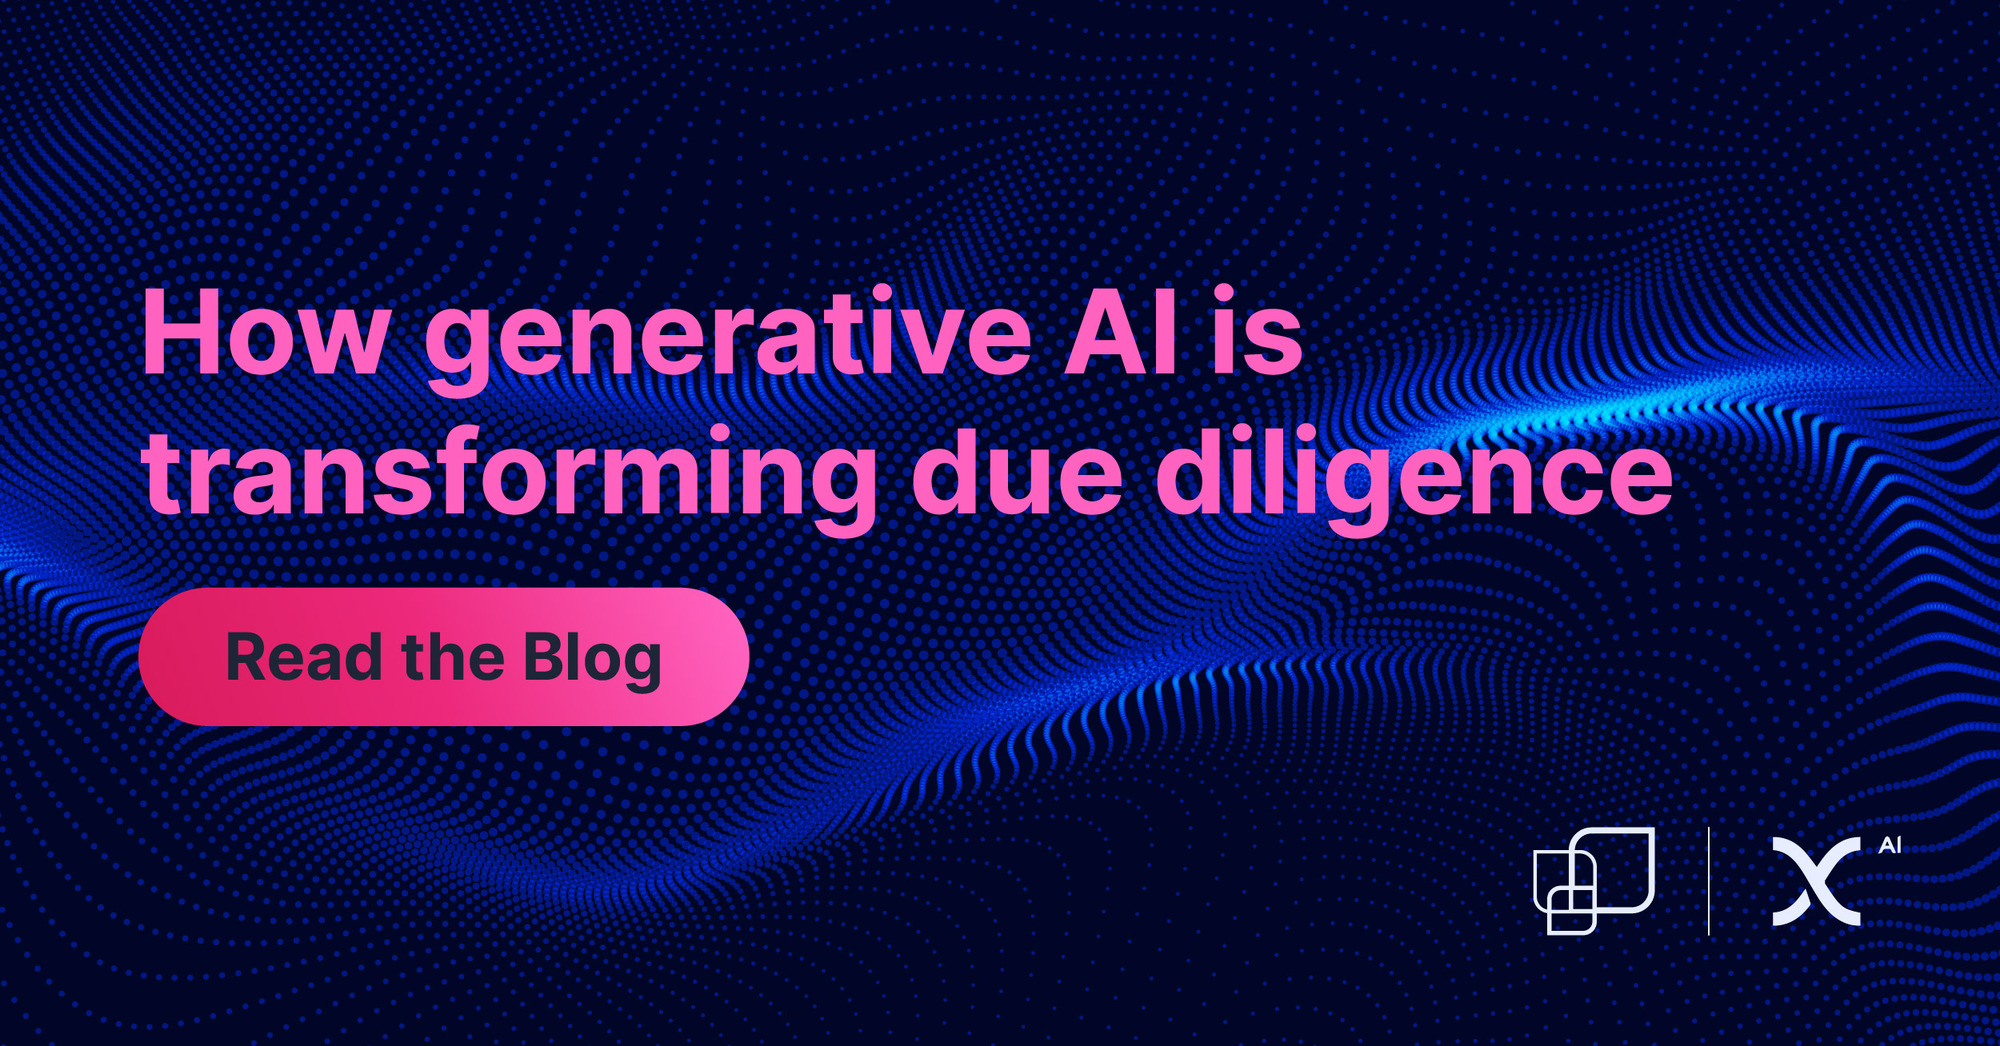 Guest Post: How generative AI is transforming due diligence